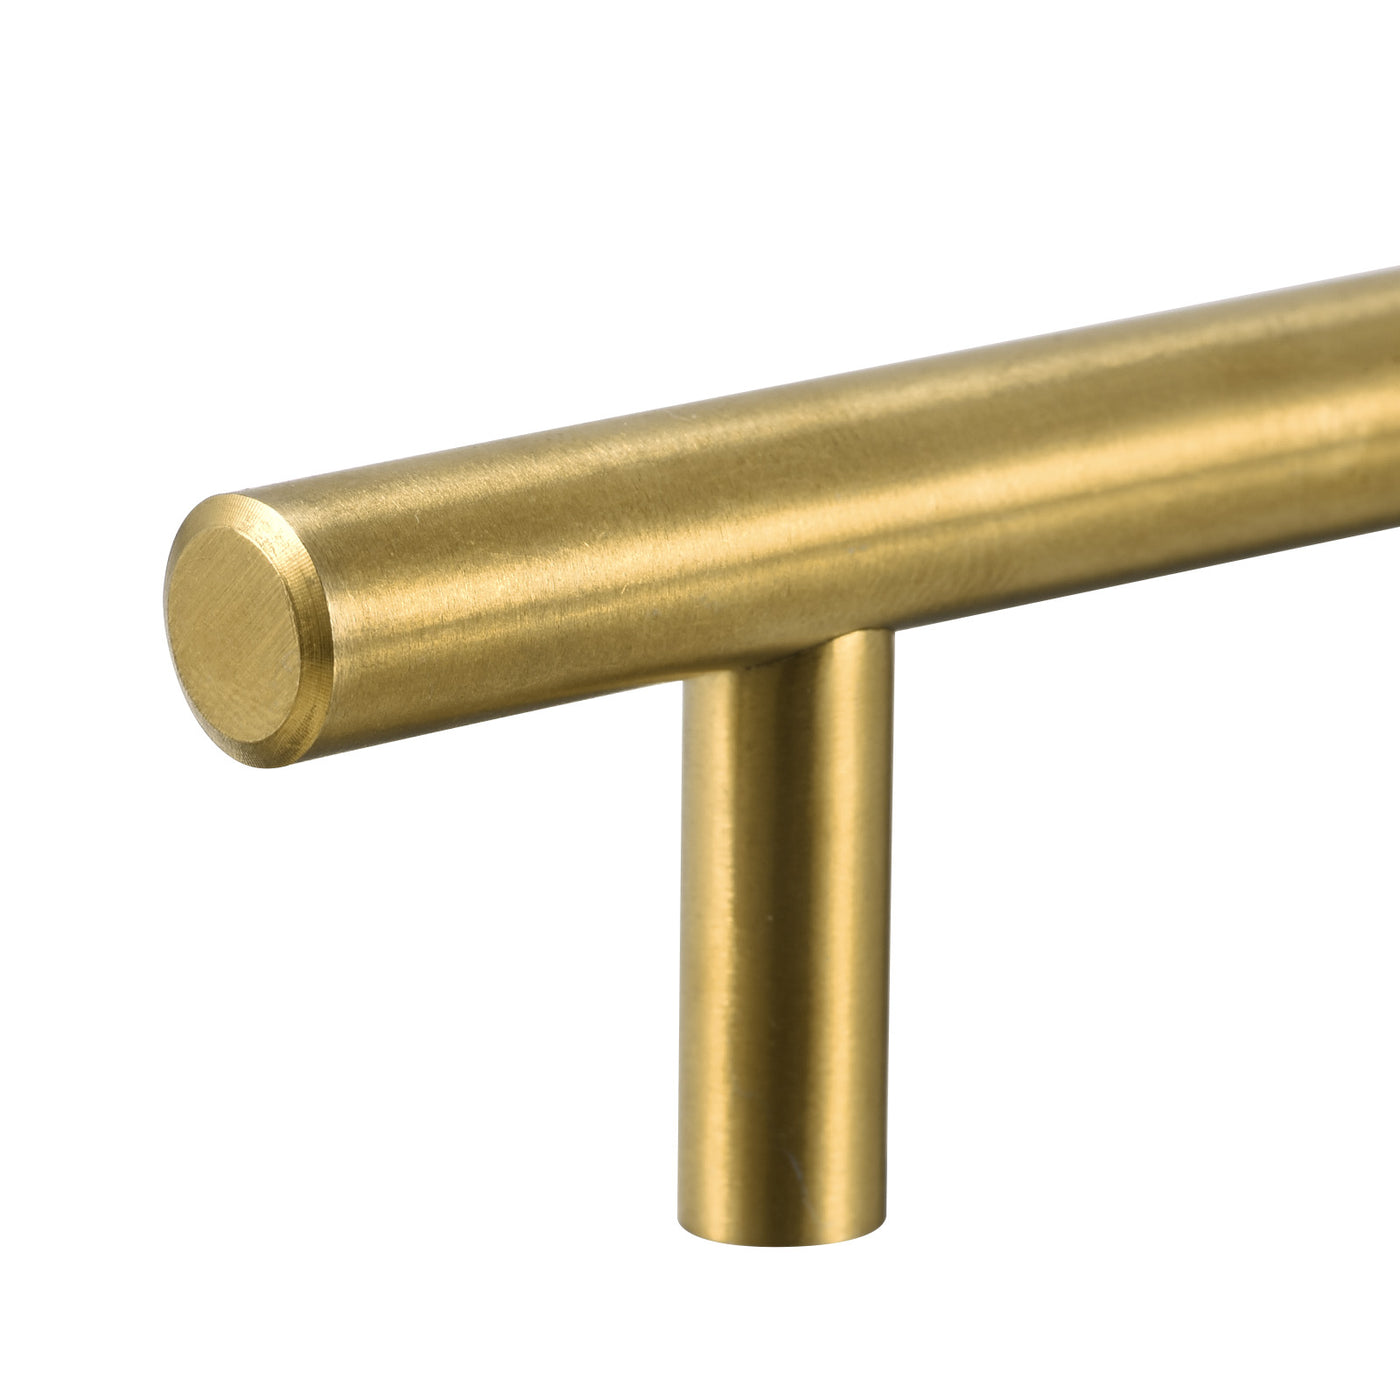 uxcell Uxcell T Bar Pull Handle, 4"(100mm) Length 12mm Dia Stainless Steel Cabinet Pulls 2.5"(64mm) Hole Center Distance Gold Tone